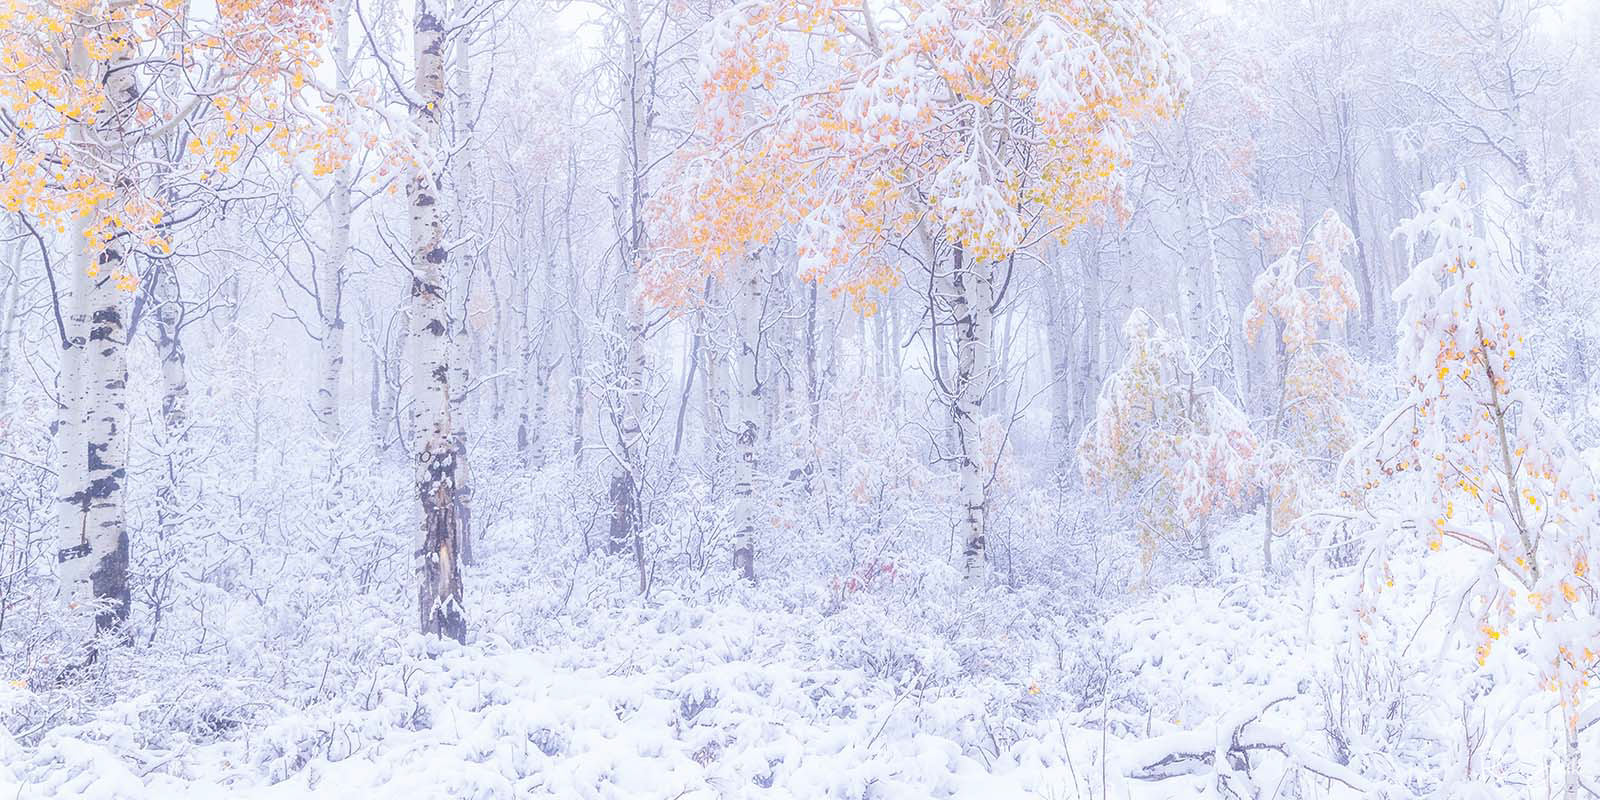 Scene with aspen trees with bright yellow leaves while the whole scene is covered in snow with more snow falling.